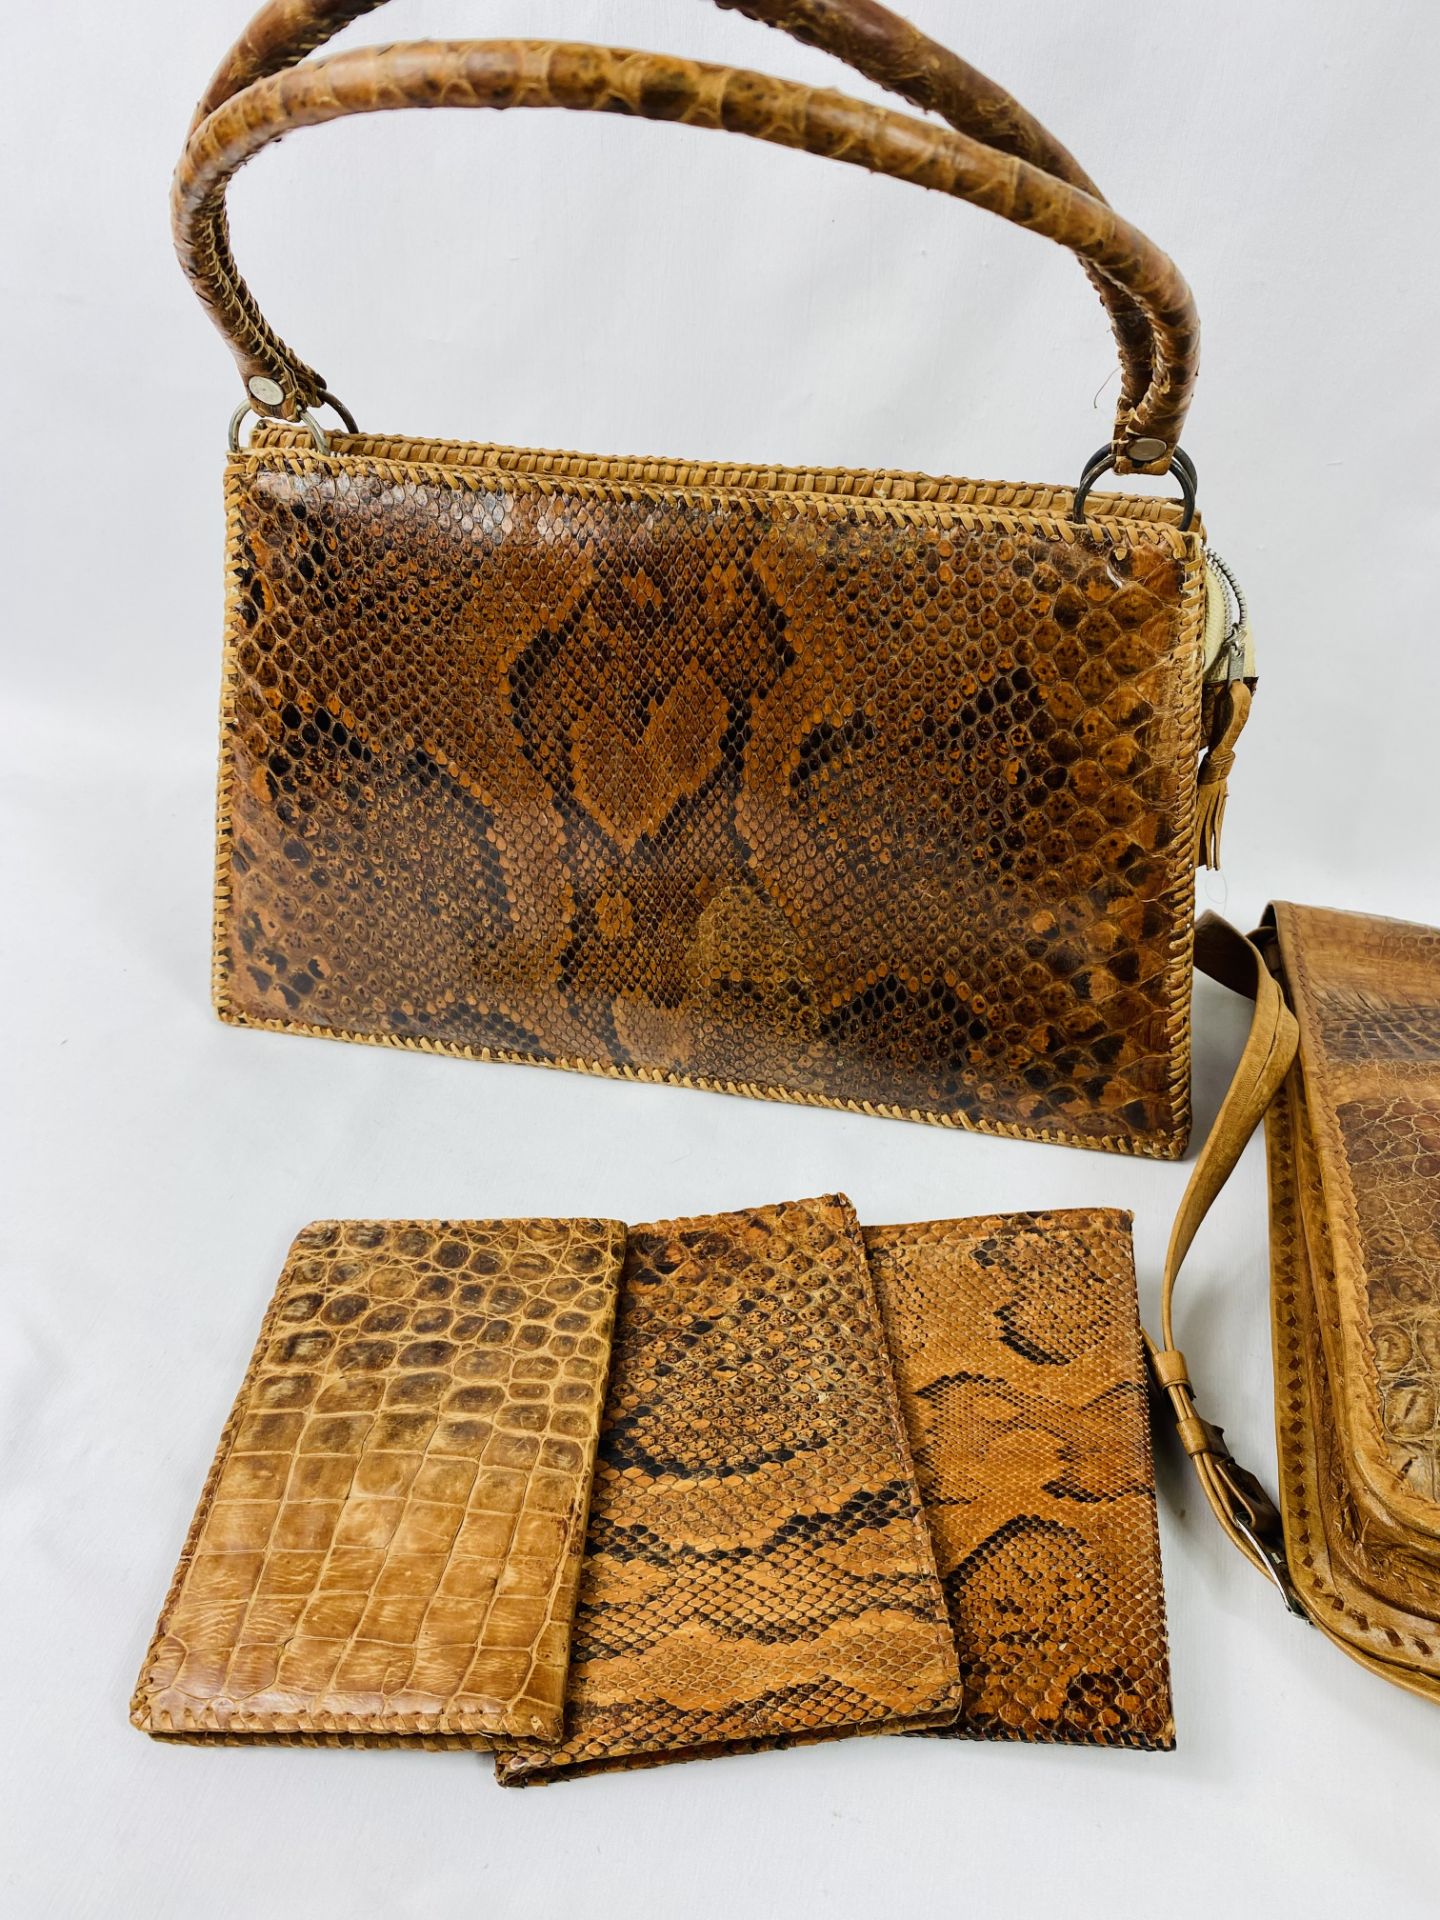 African crocodile handbag and other items. CITIES REGULATIONS APPLY TO THIS LOT. - Image 2 of 3